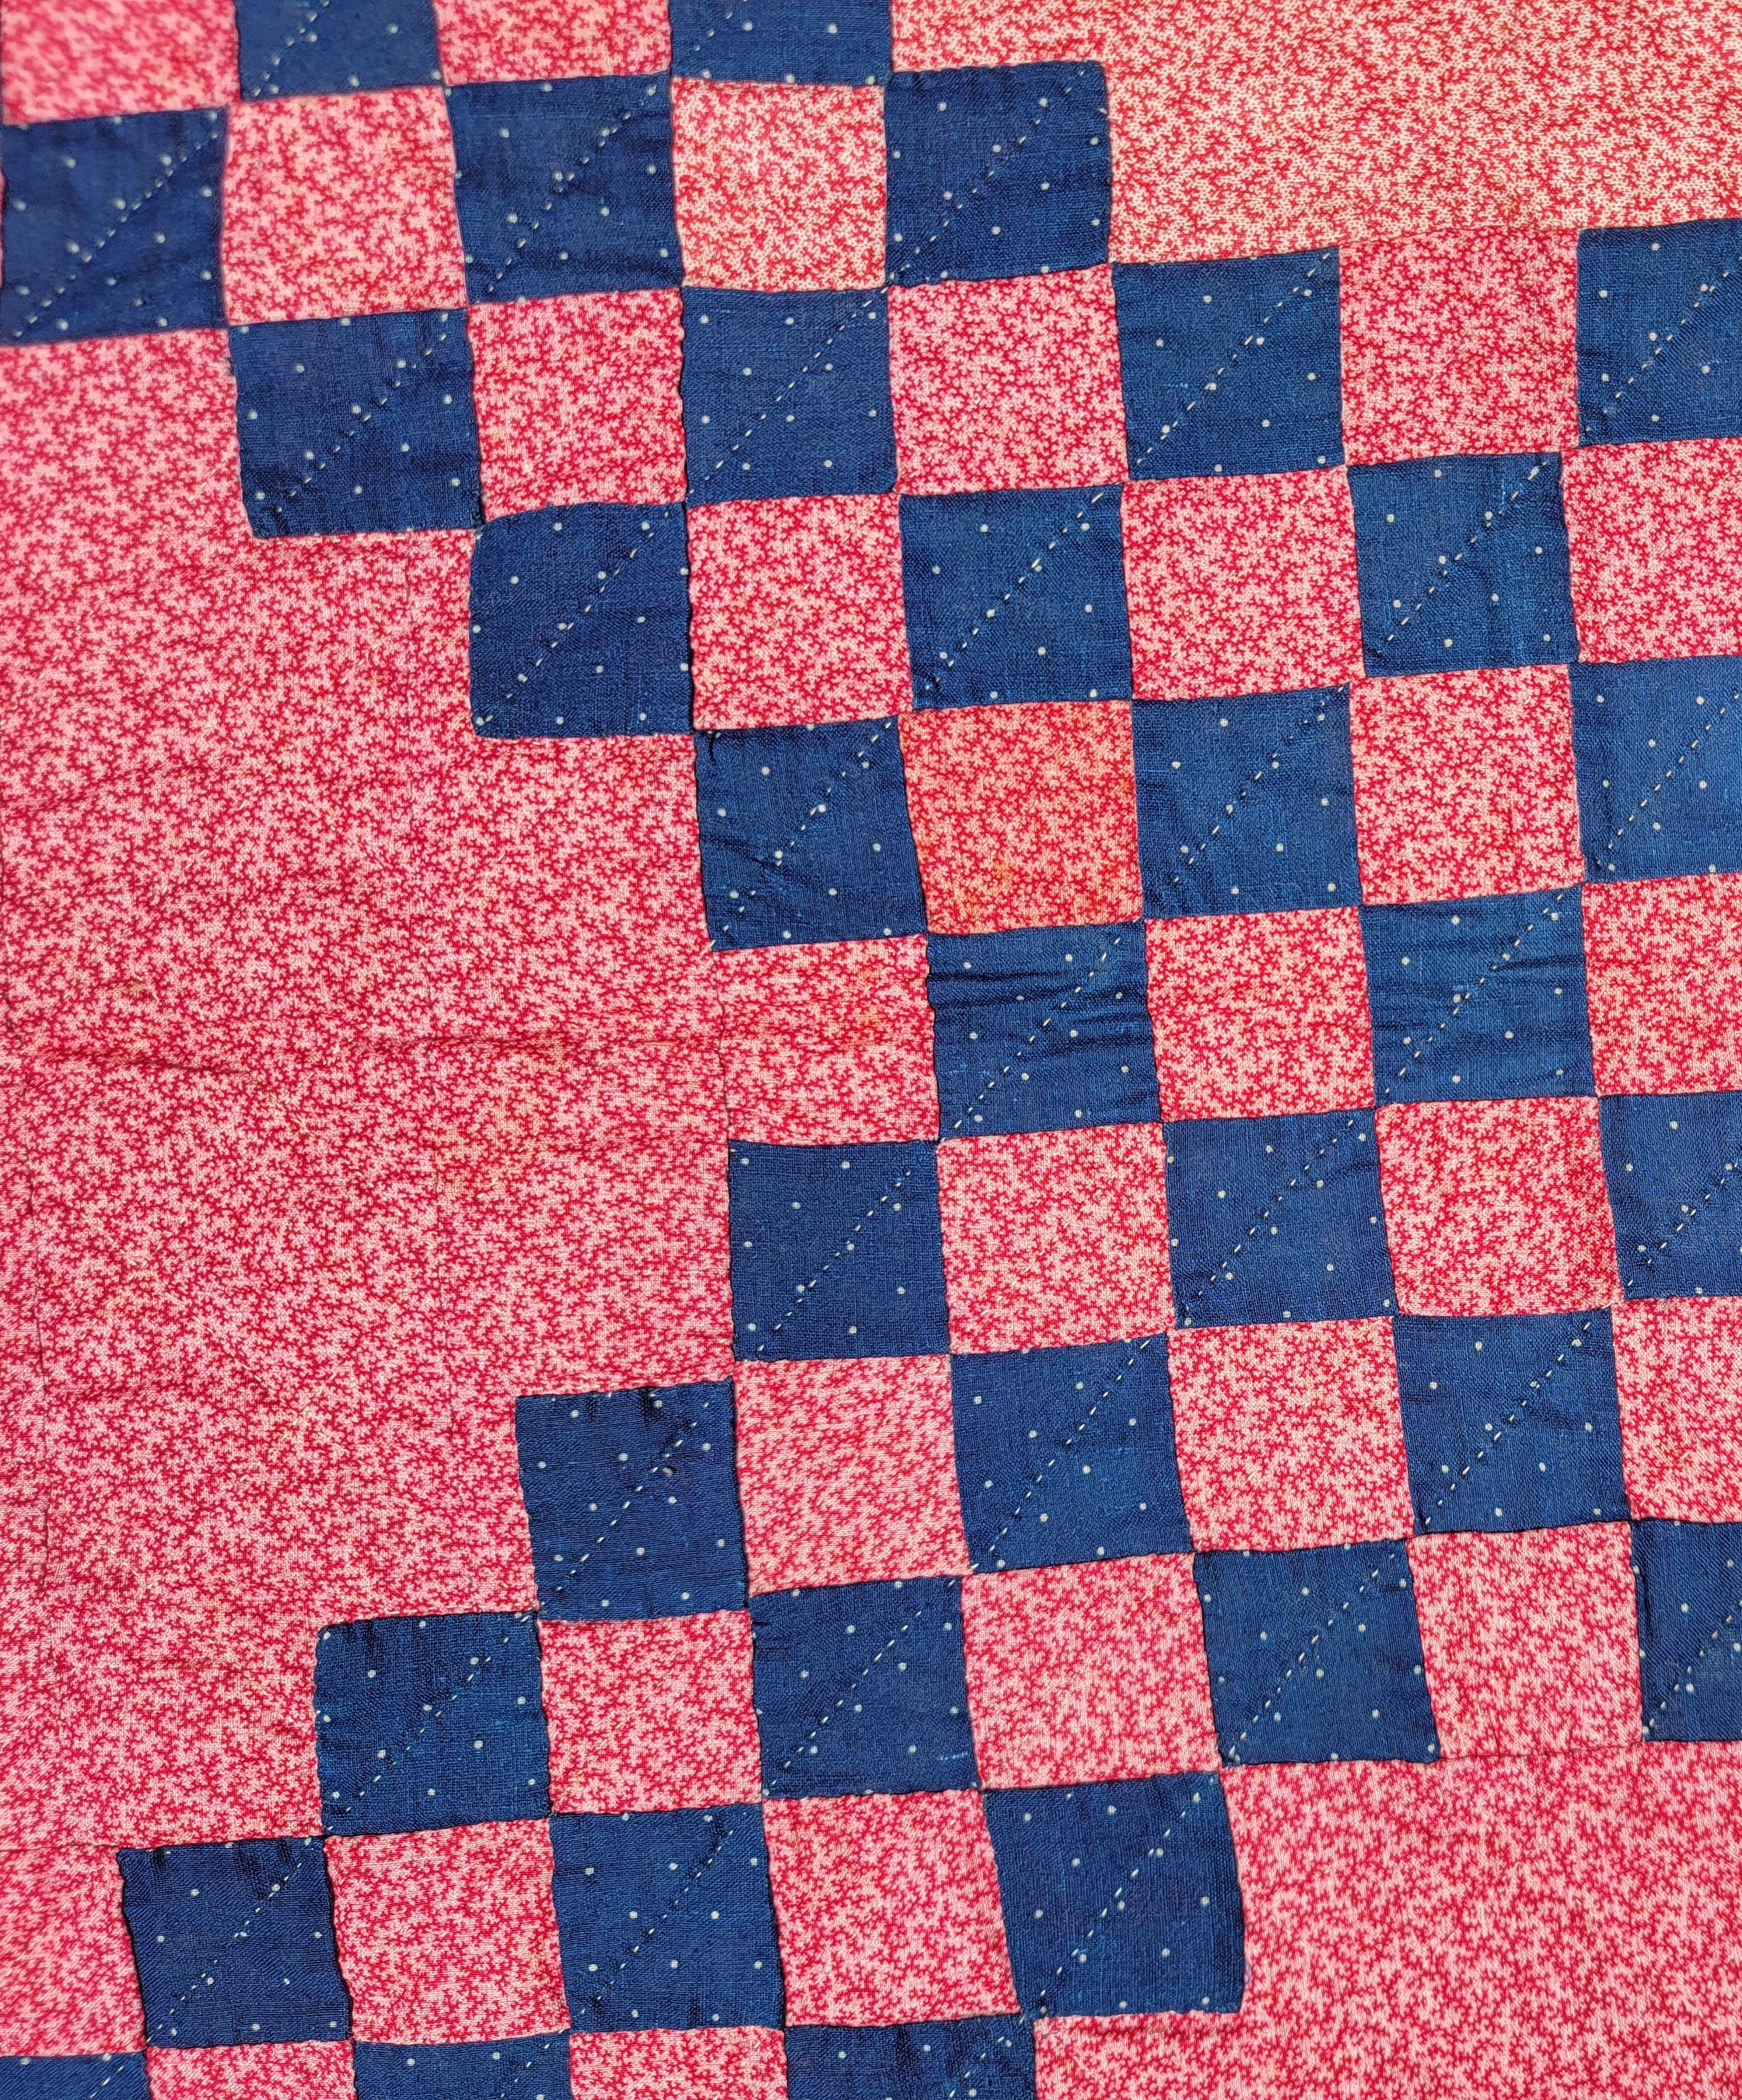 Hand-Crafted 19Thc Indigo Blue Irish Chain Quilt on a Red Calico Ground For Sale